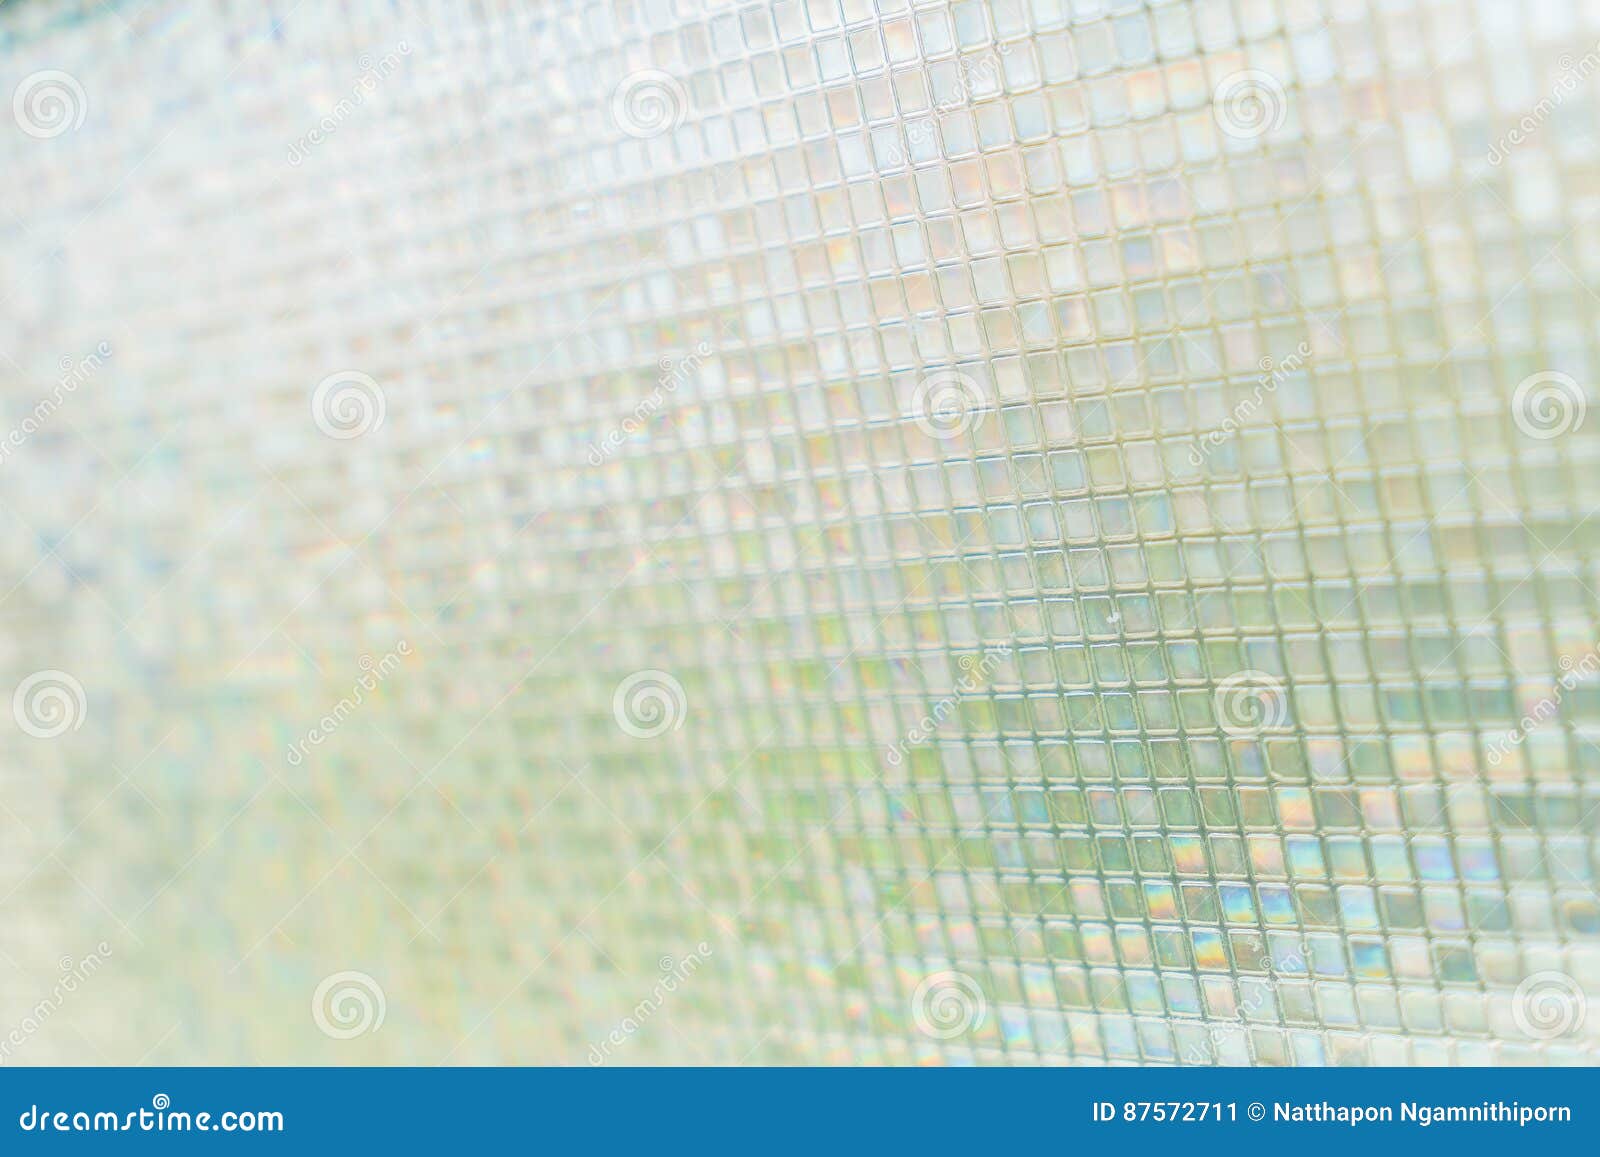 Seamless Blue Glass Tiles Texture Background Stock Image - Image of